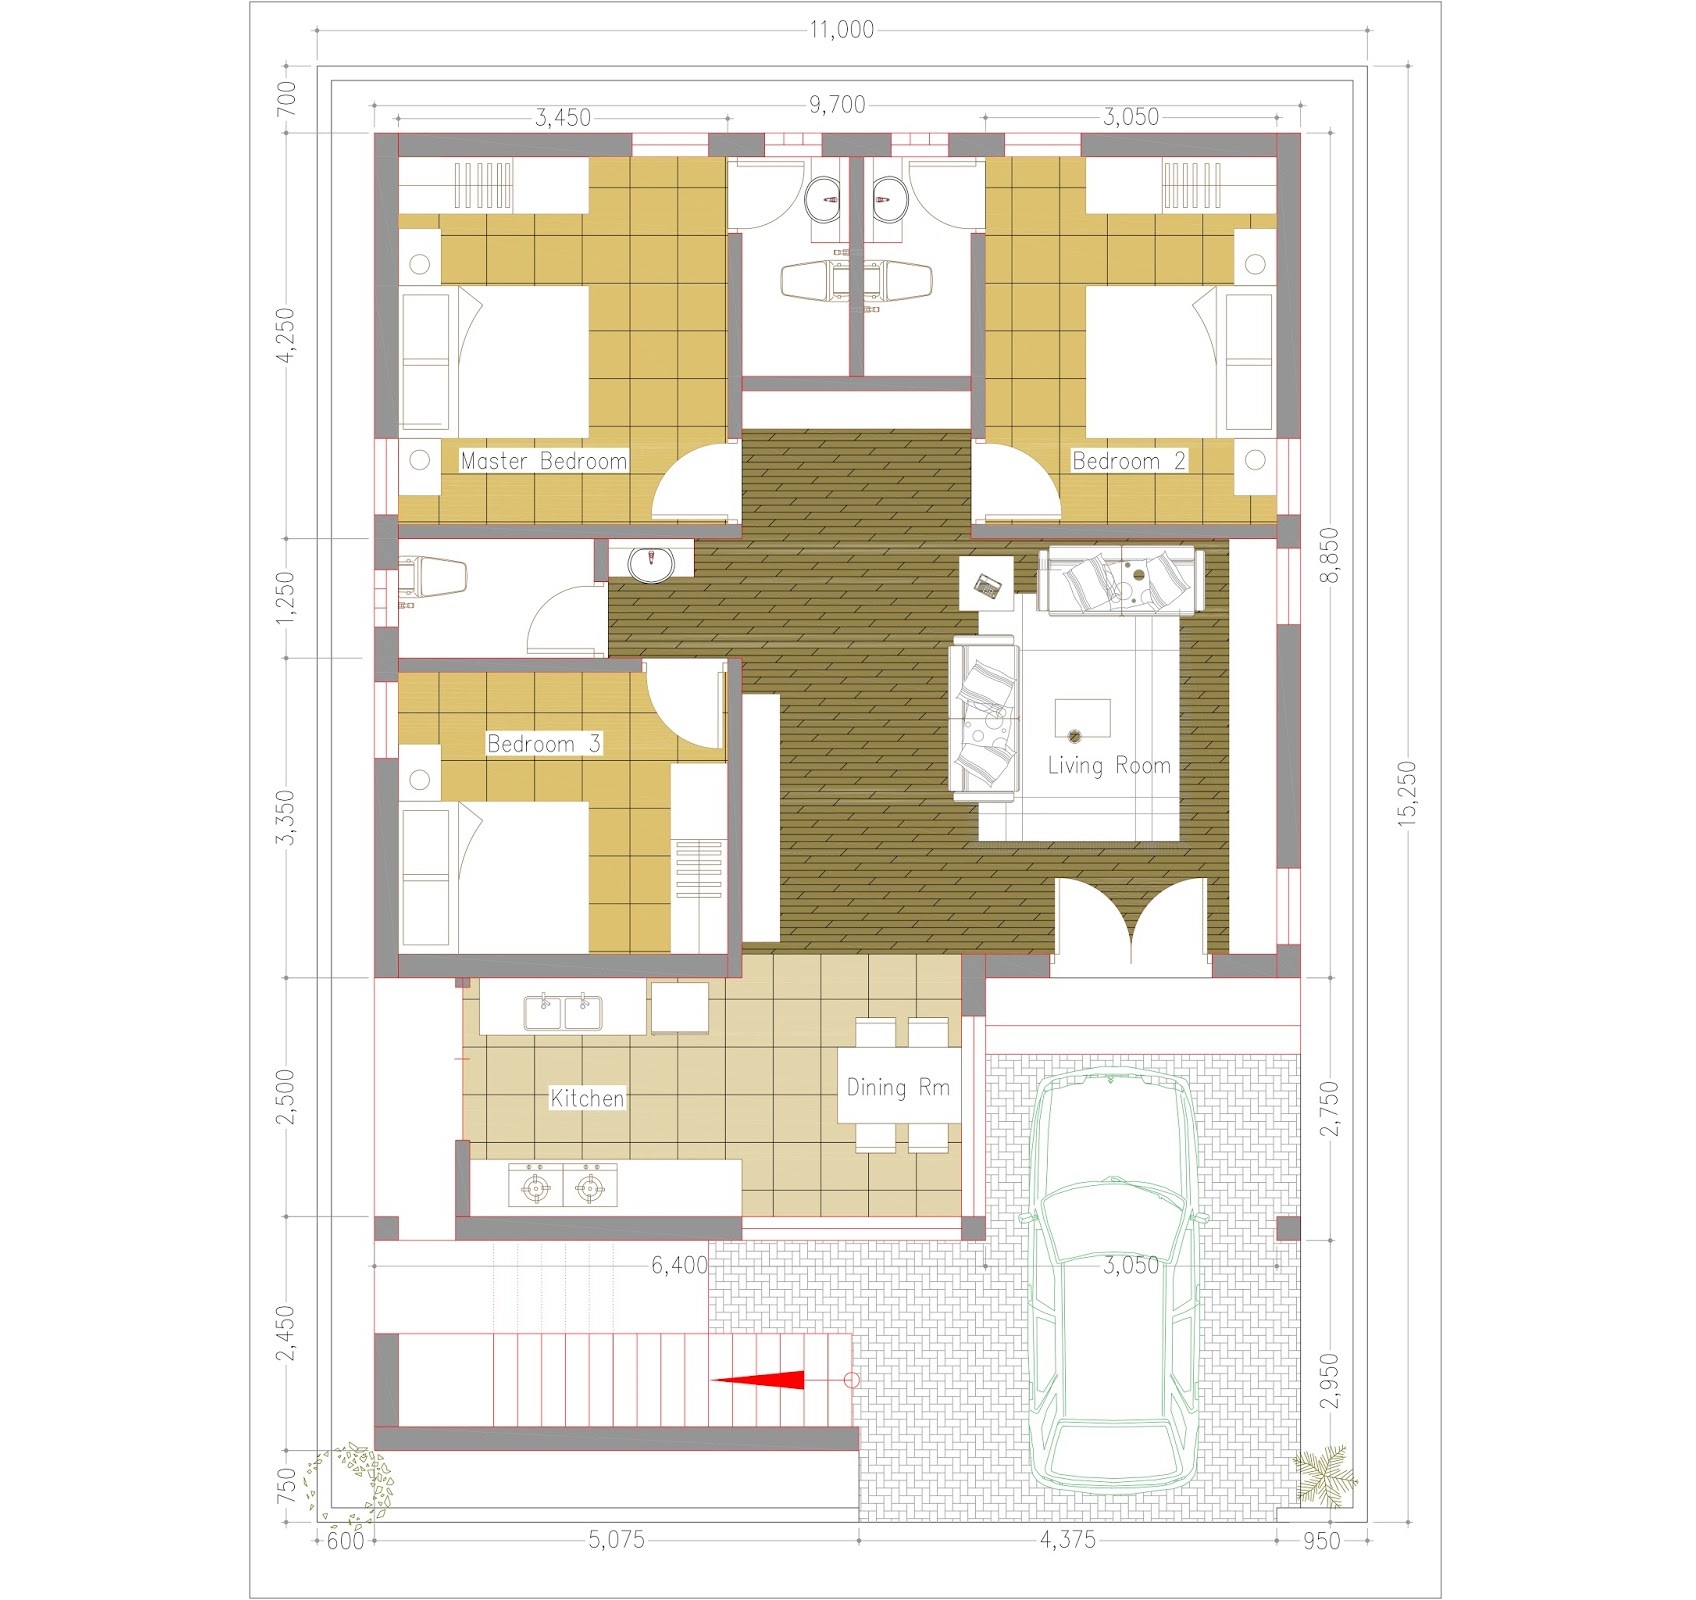 House design 11x15 with 3 bedrooms Terrace roof layout floor plan